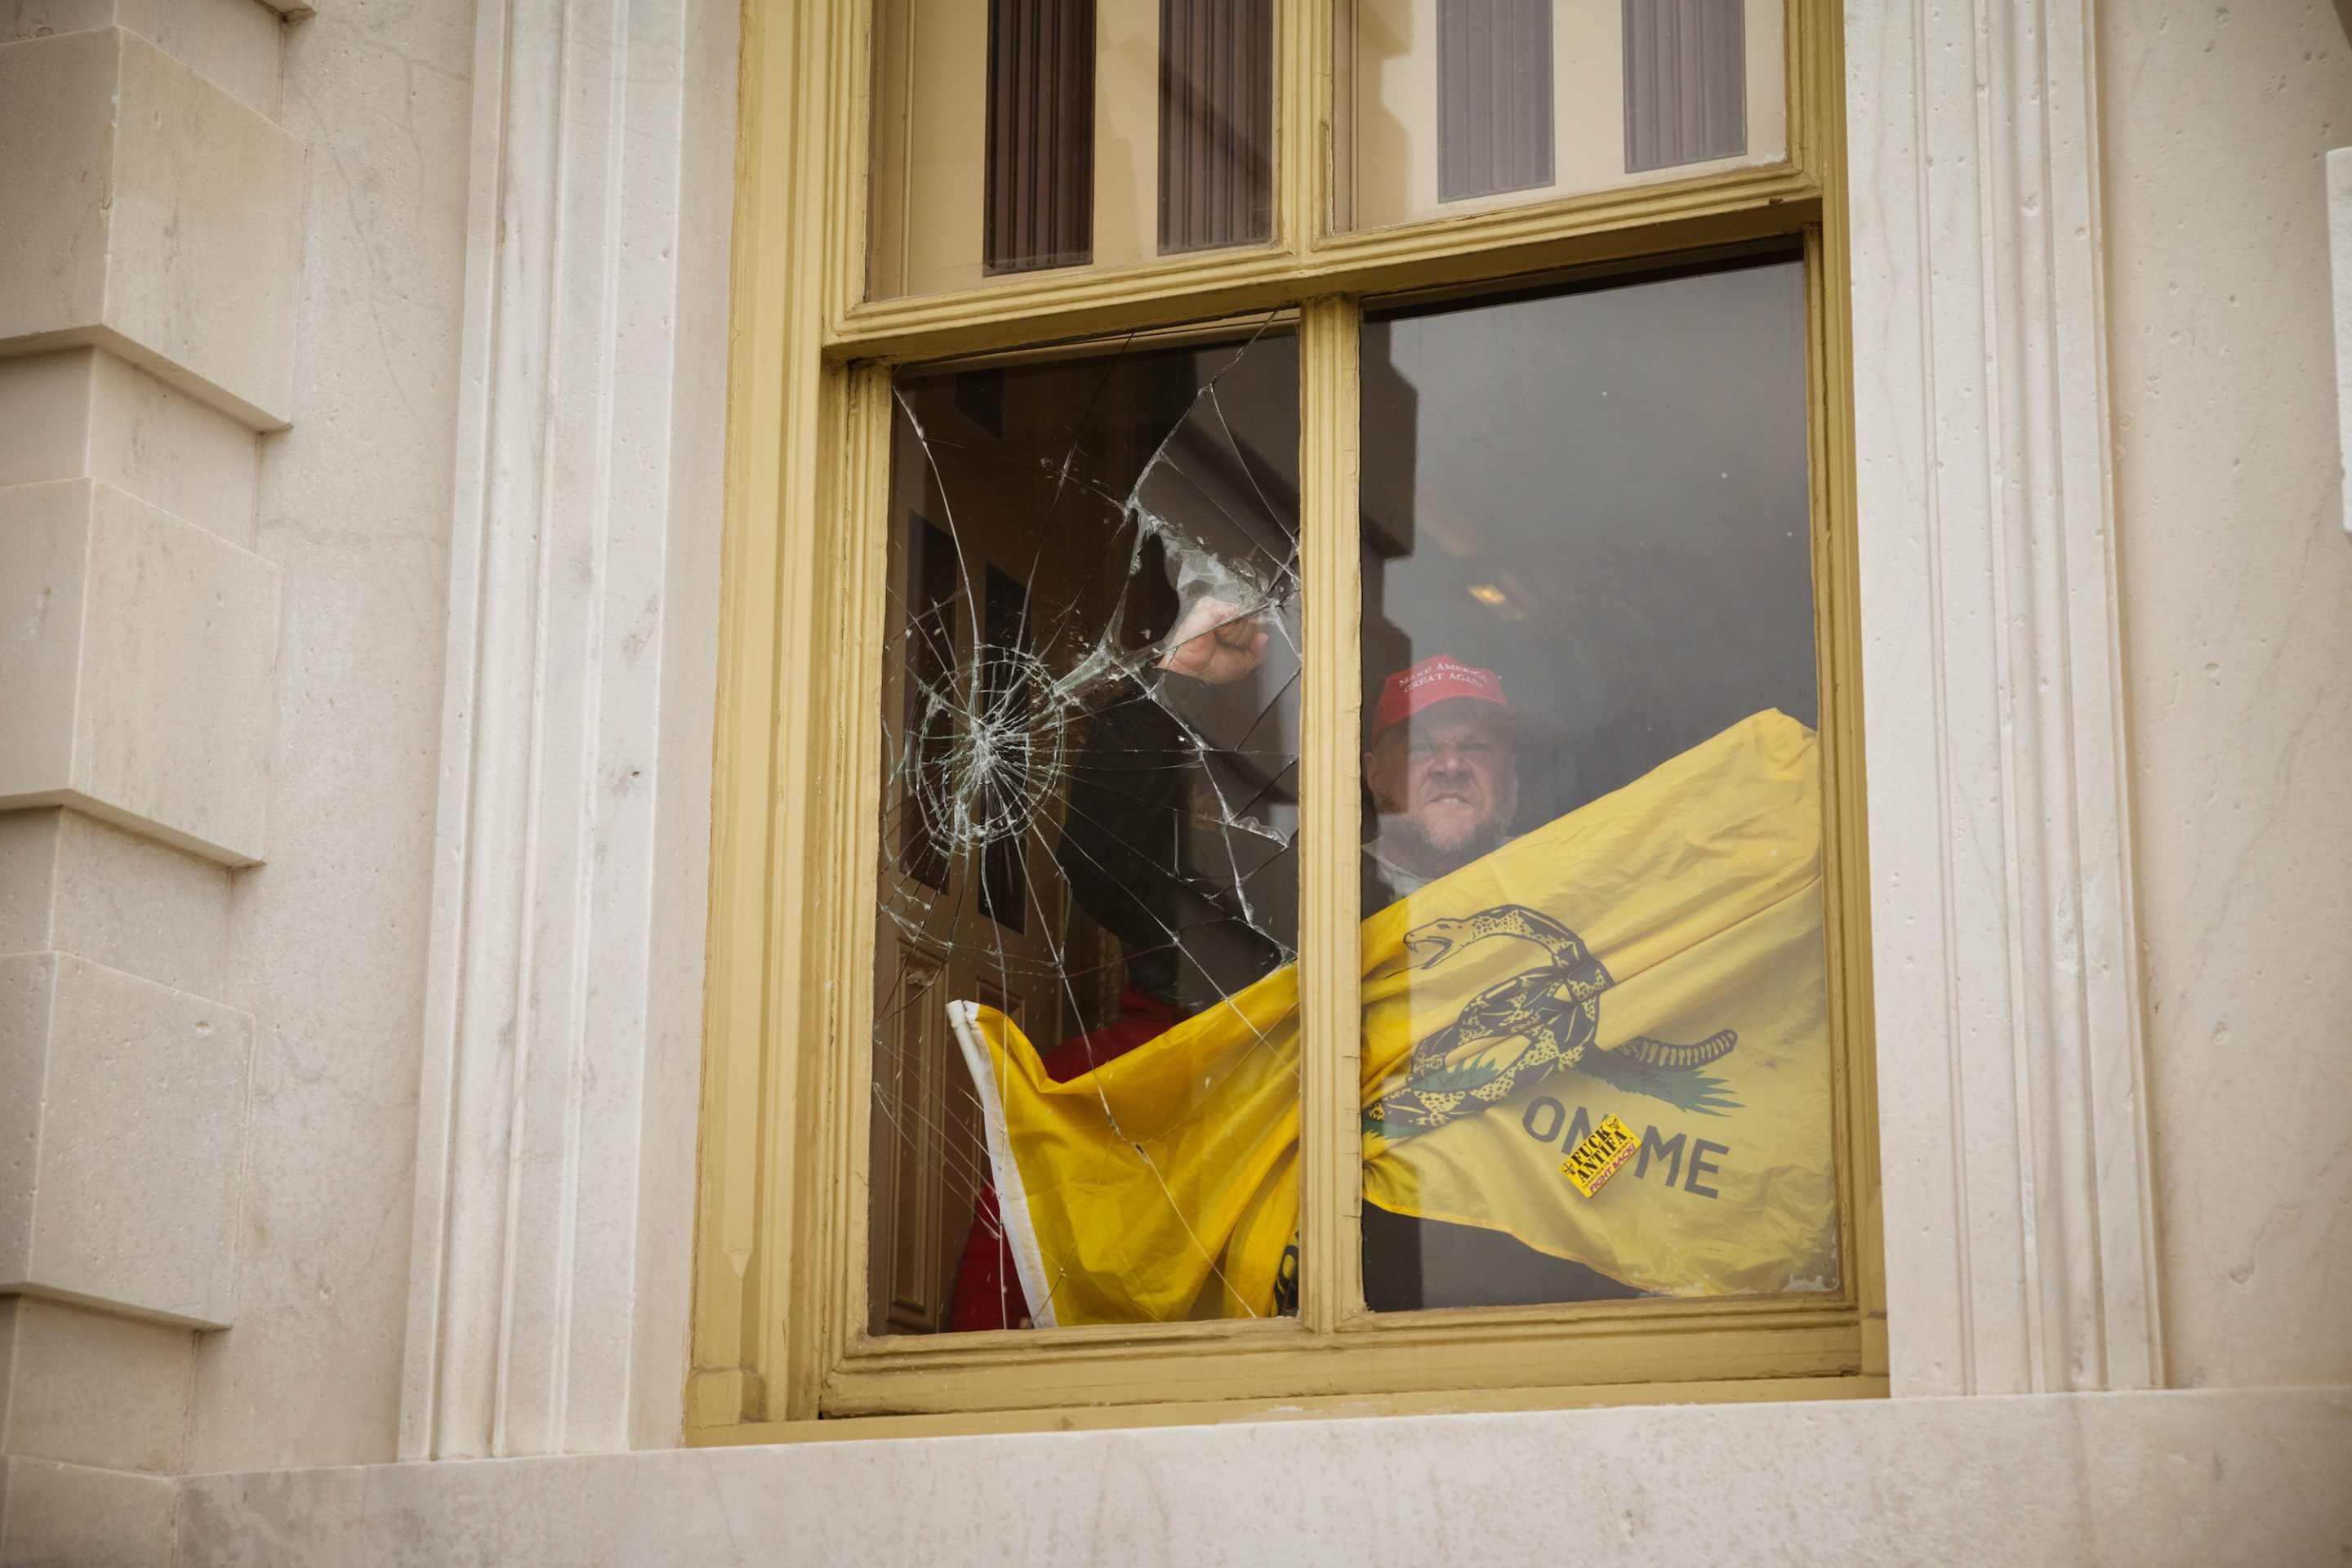 A member of a pro-Trump mob shatters a window with his fist from inside the Capitol Building after breaking into it on January 6, 2021 in Washington, DC.